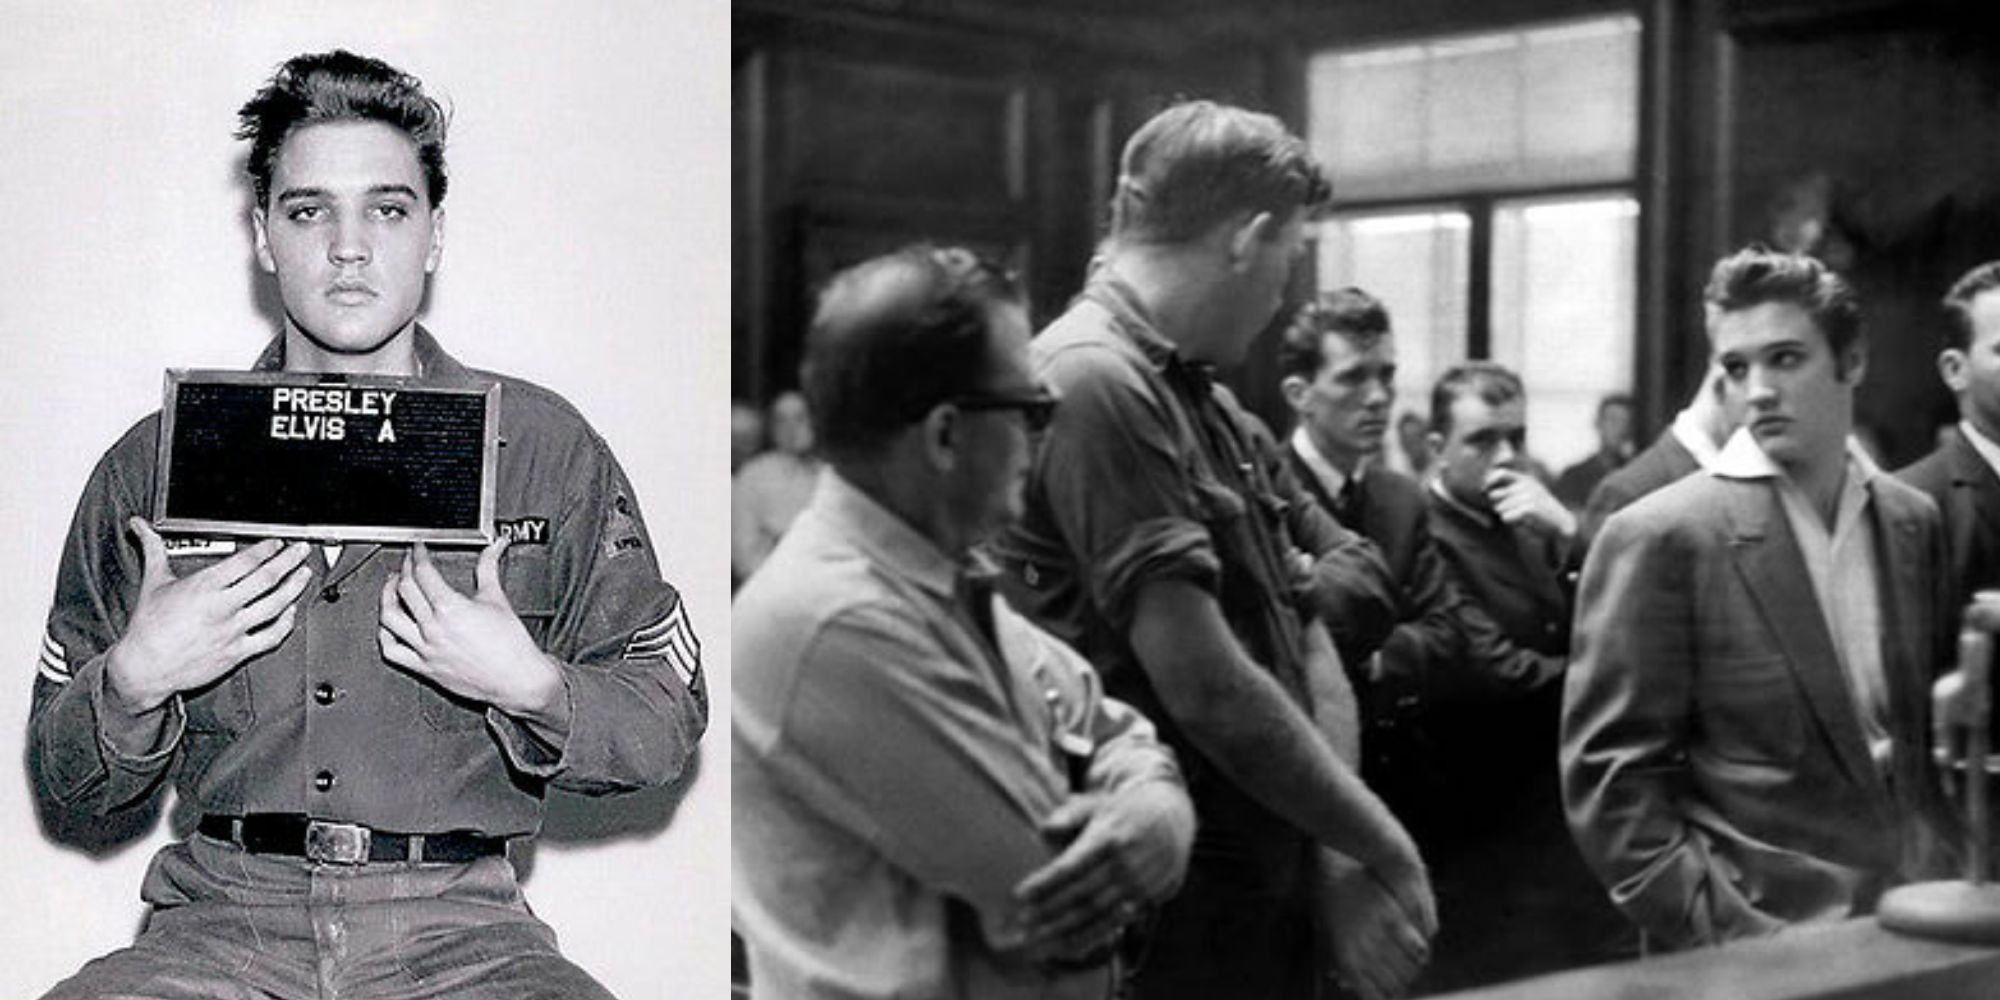 Elvis mugshot and in court in 1955